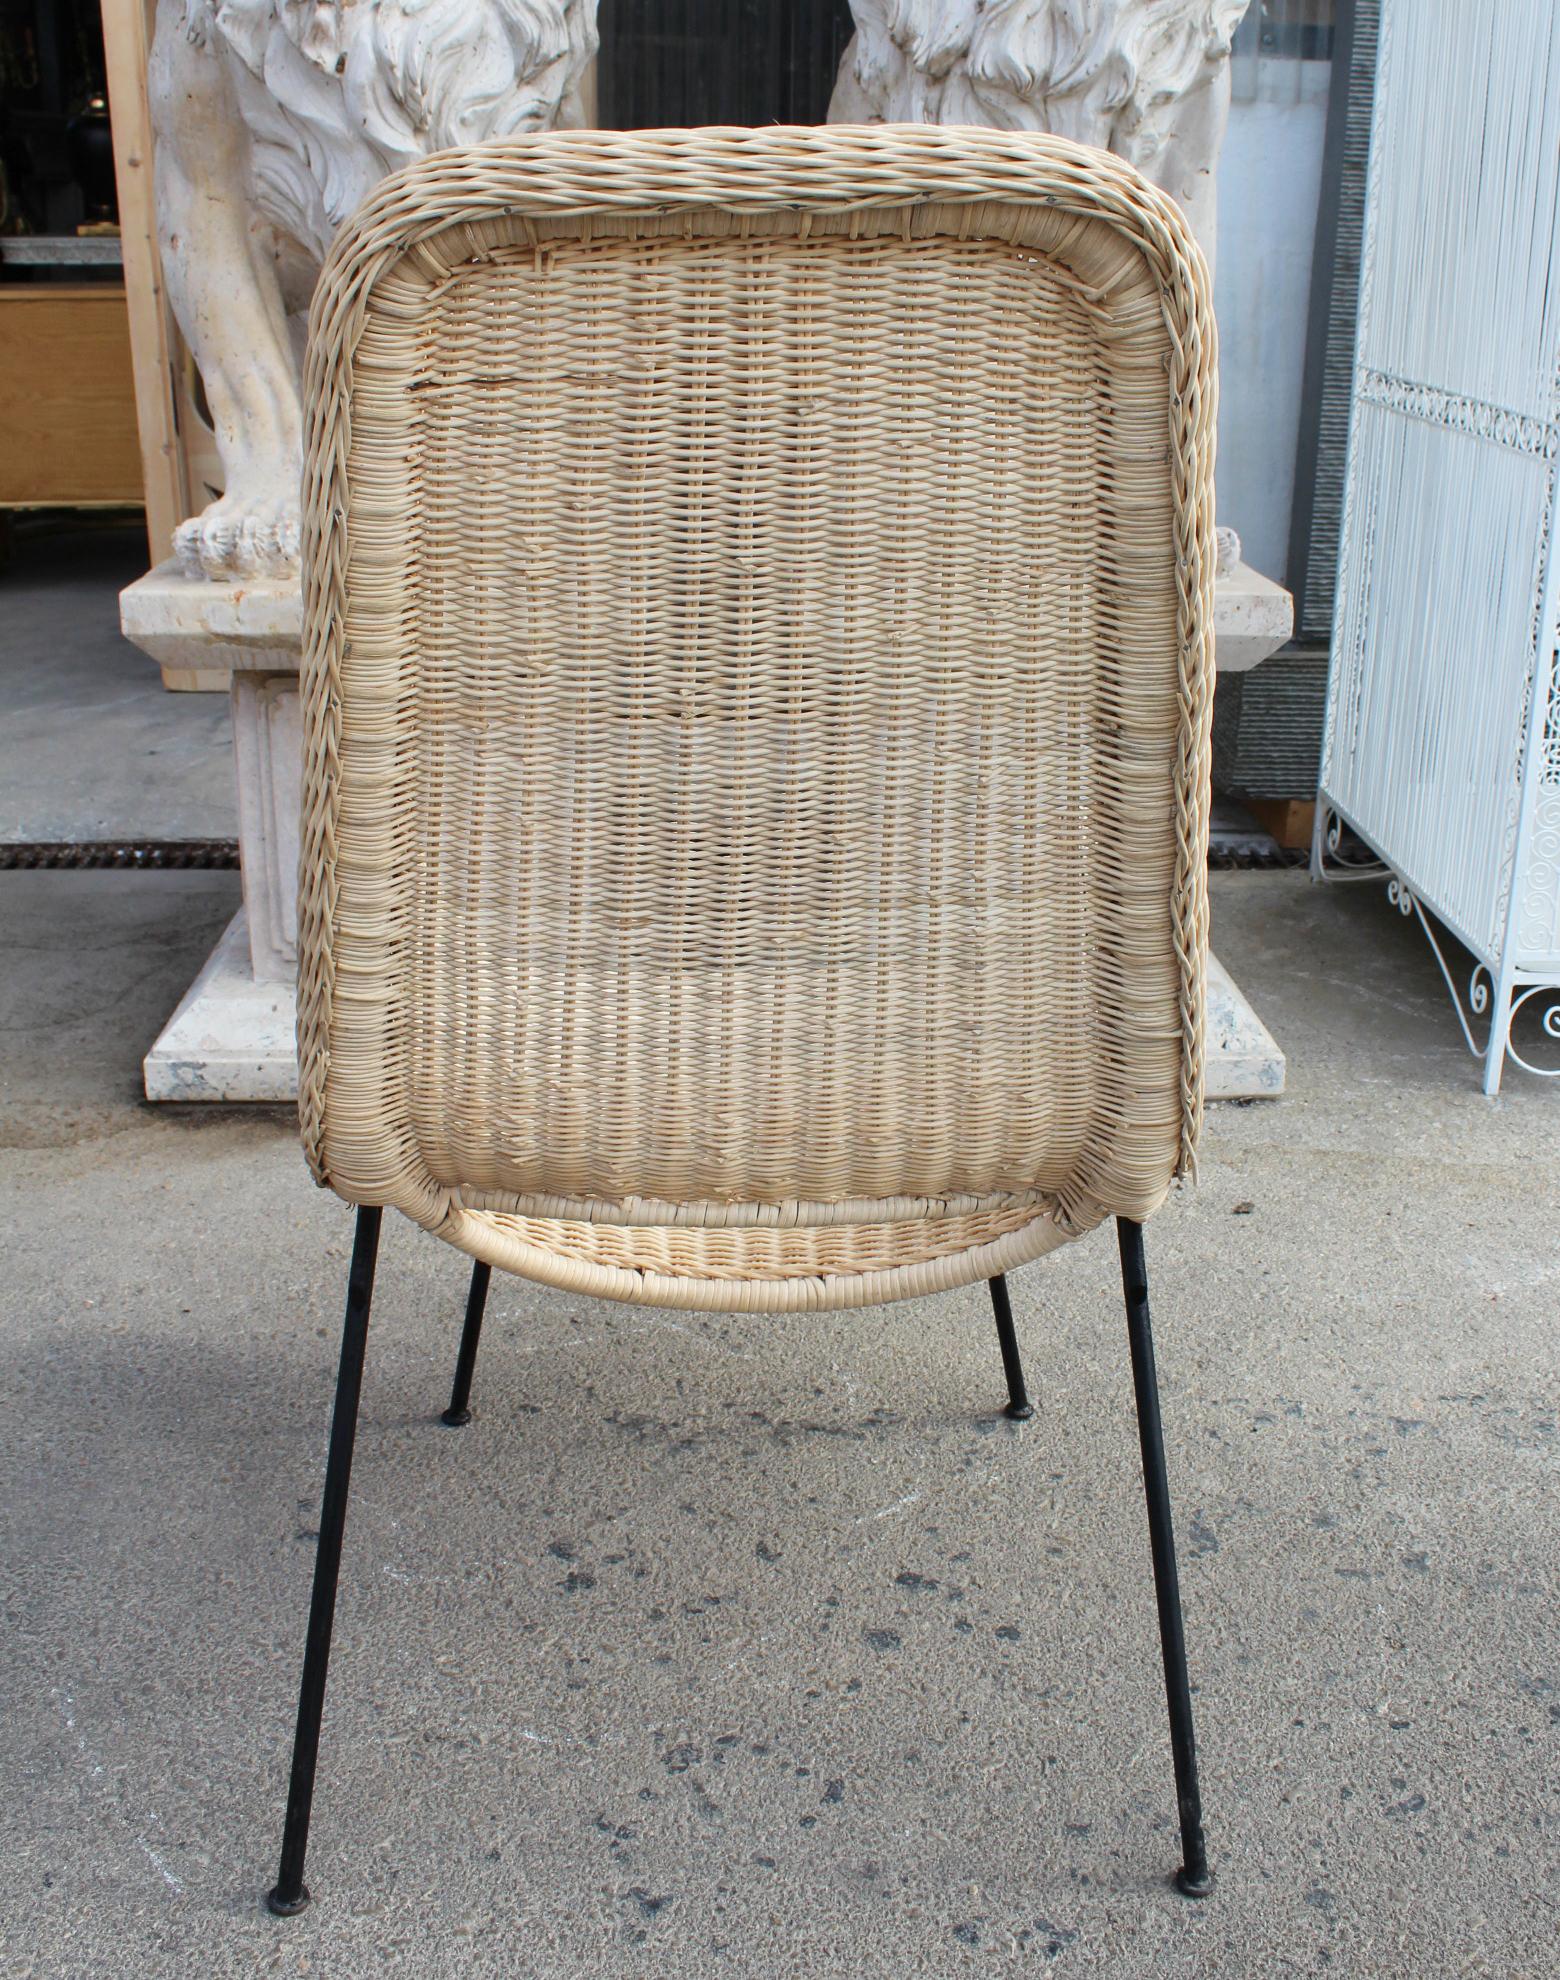 Hand-Woven Hand Crafted Natural Rattan Chair with Iron Legs and Back